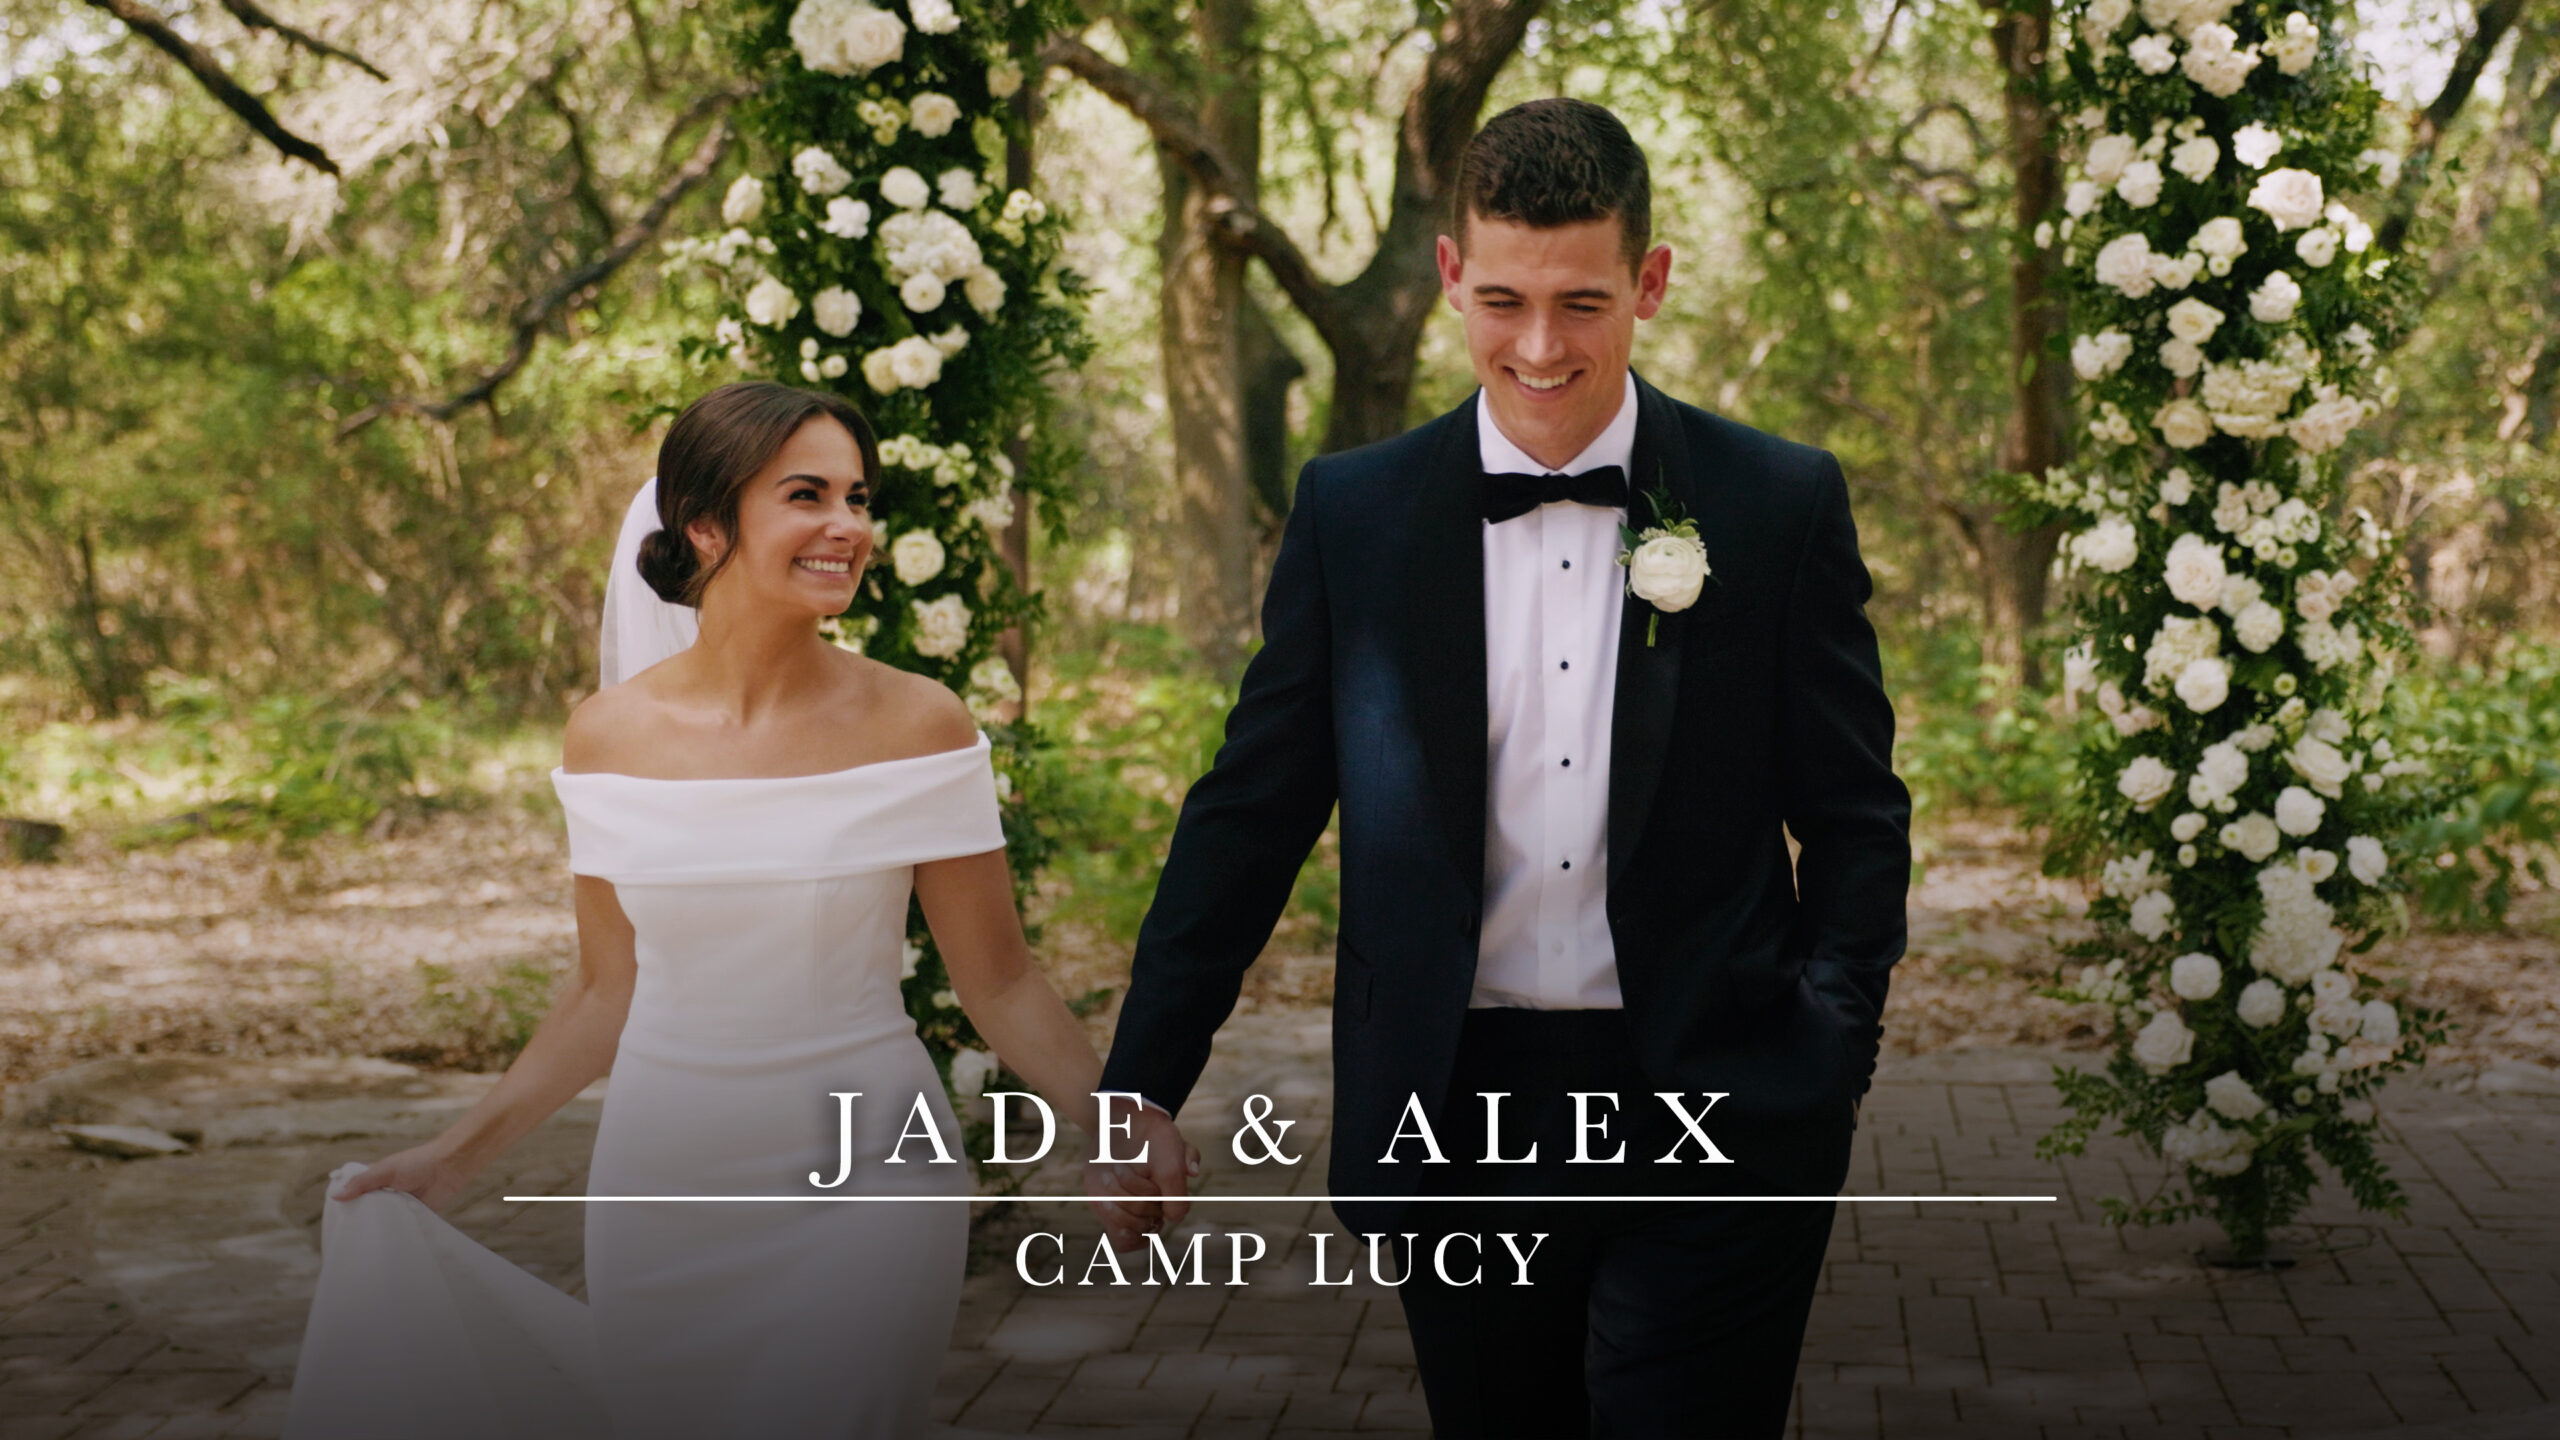 Jade and Alex wedding at Camp Lucy